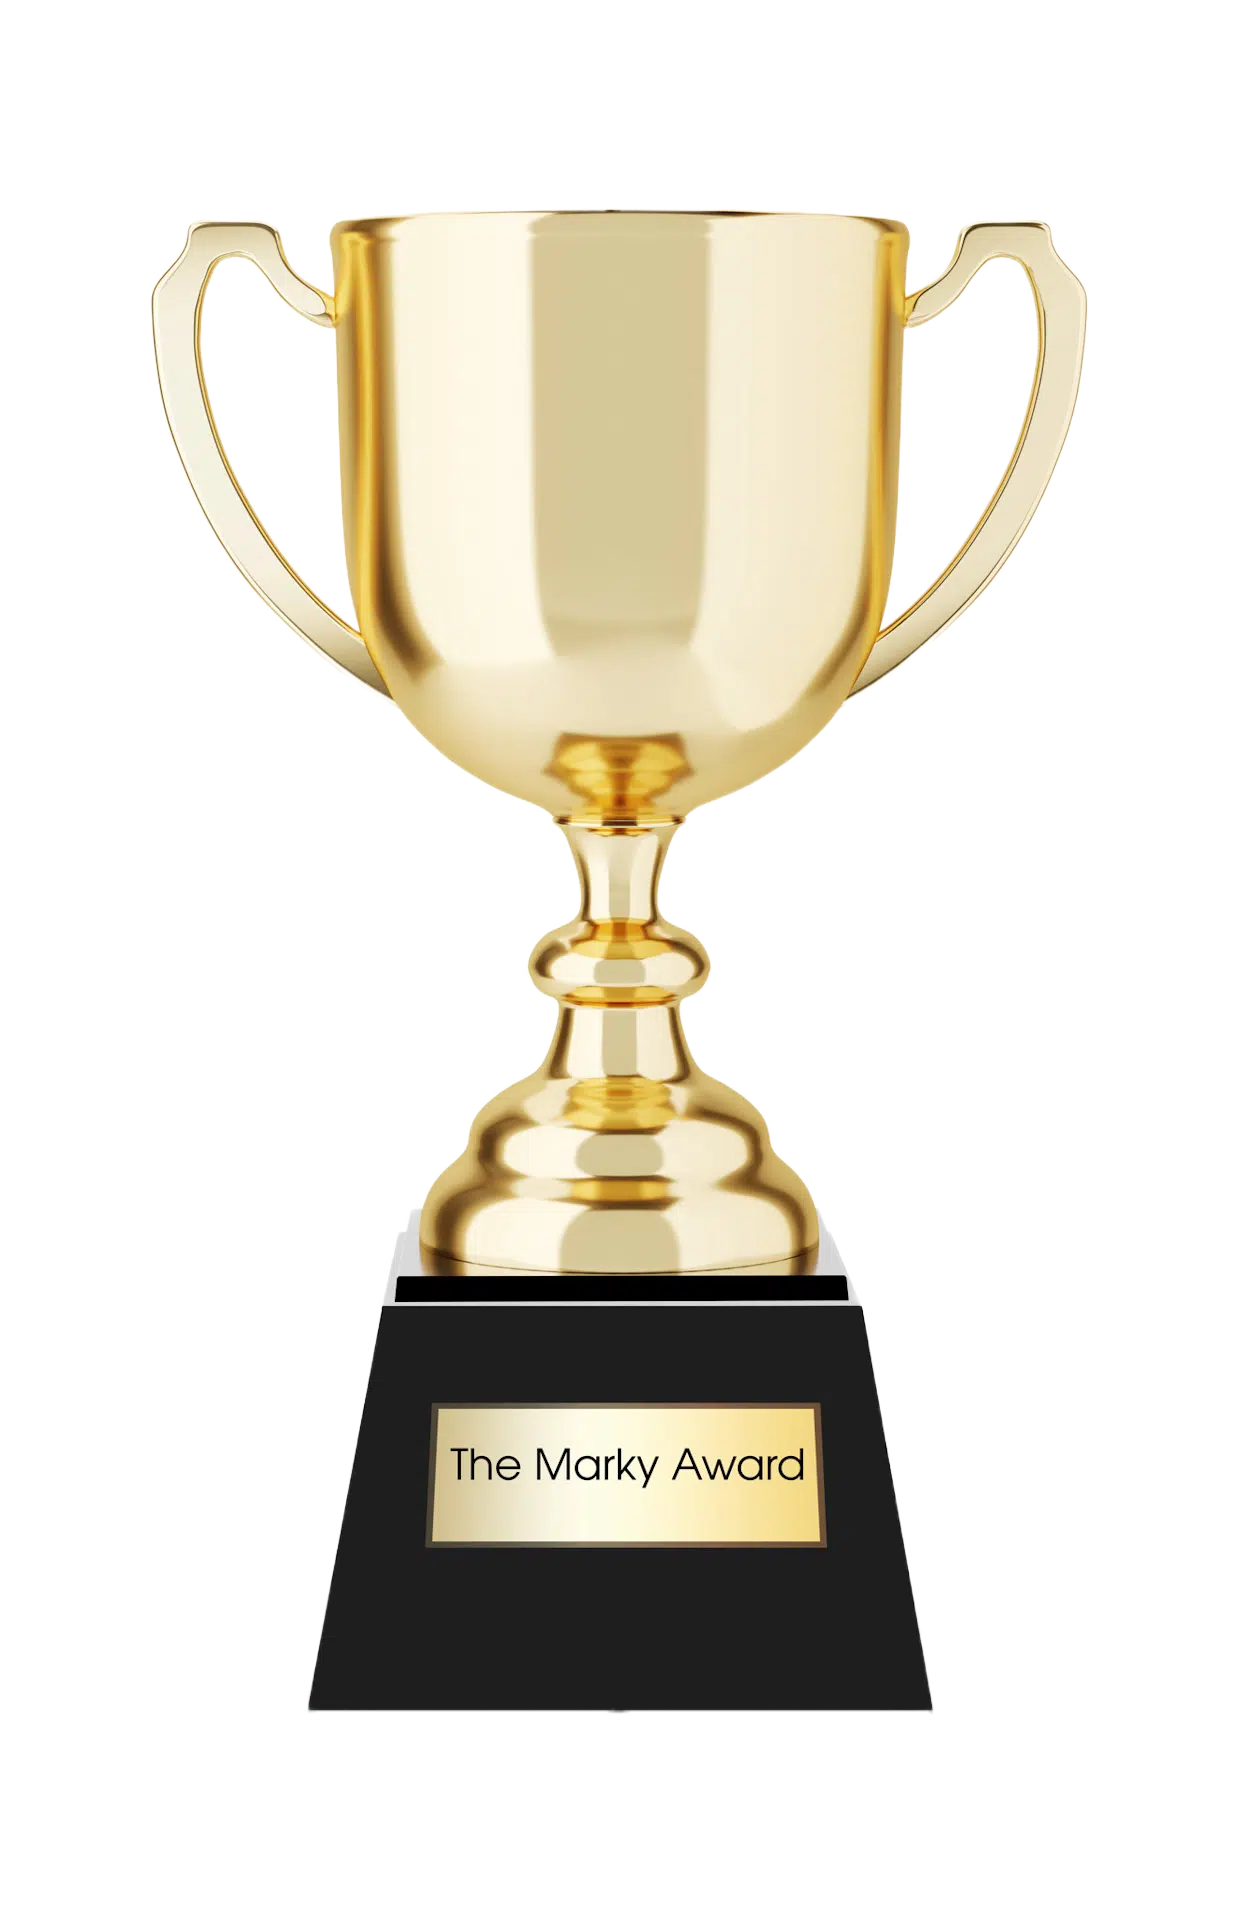 The coveted golden marky award for the best of the best in the spirit of captain mark richards